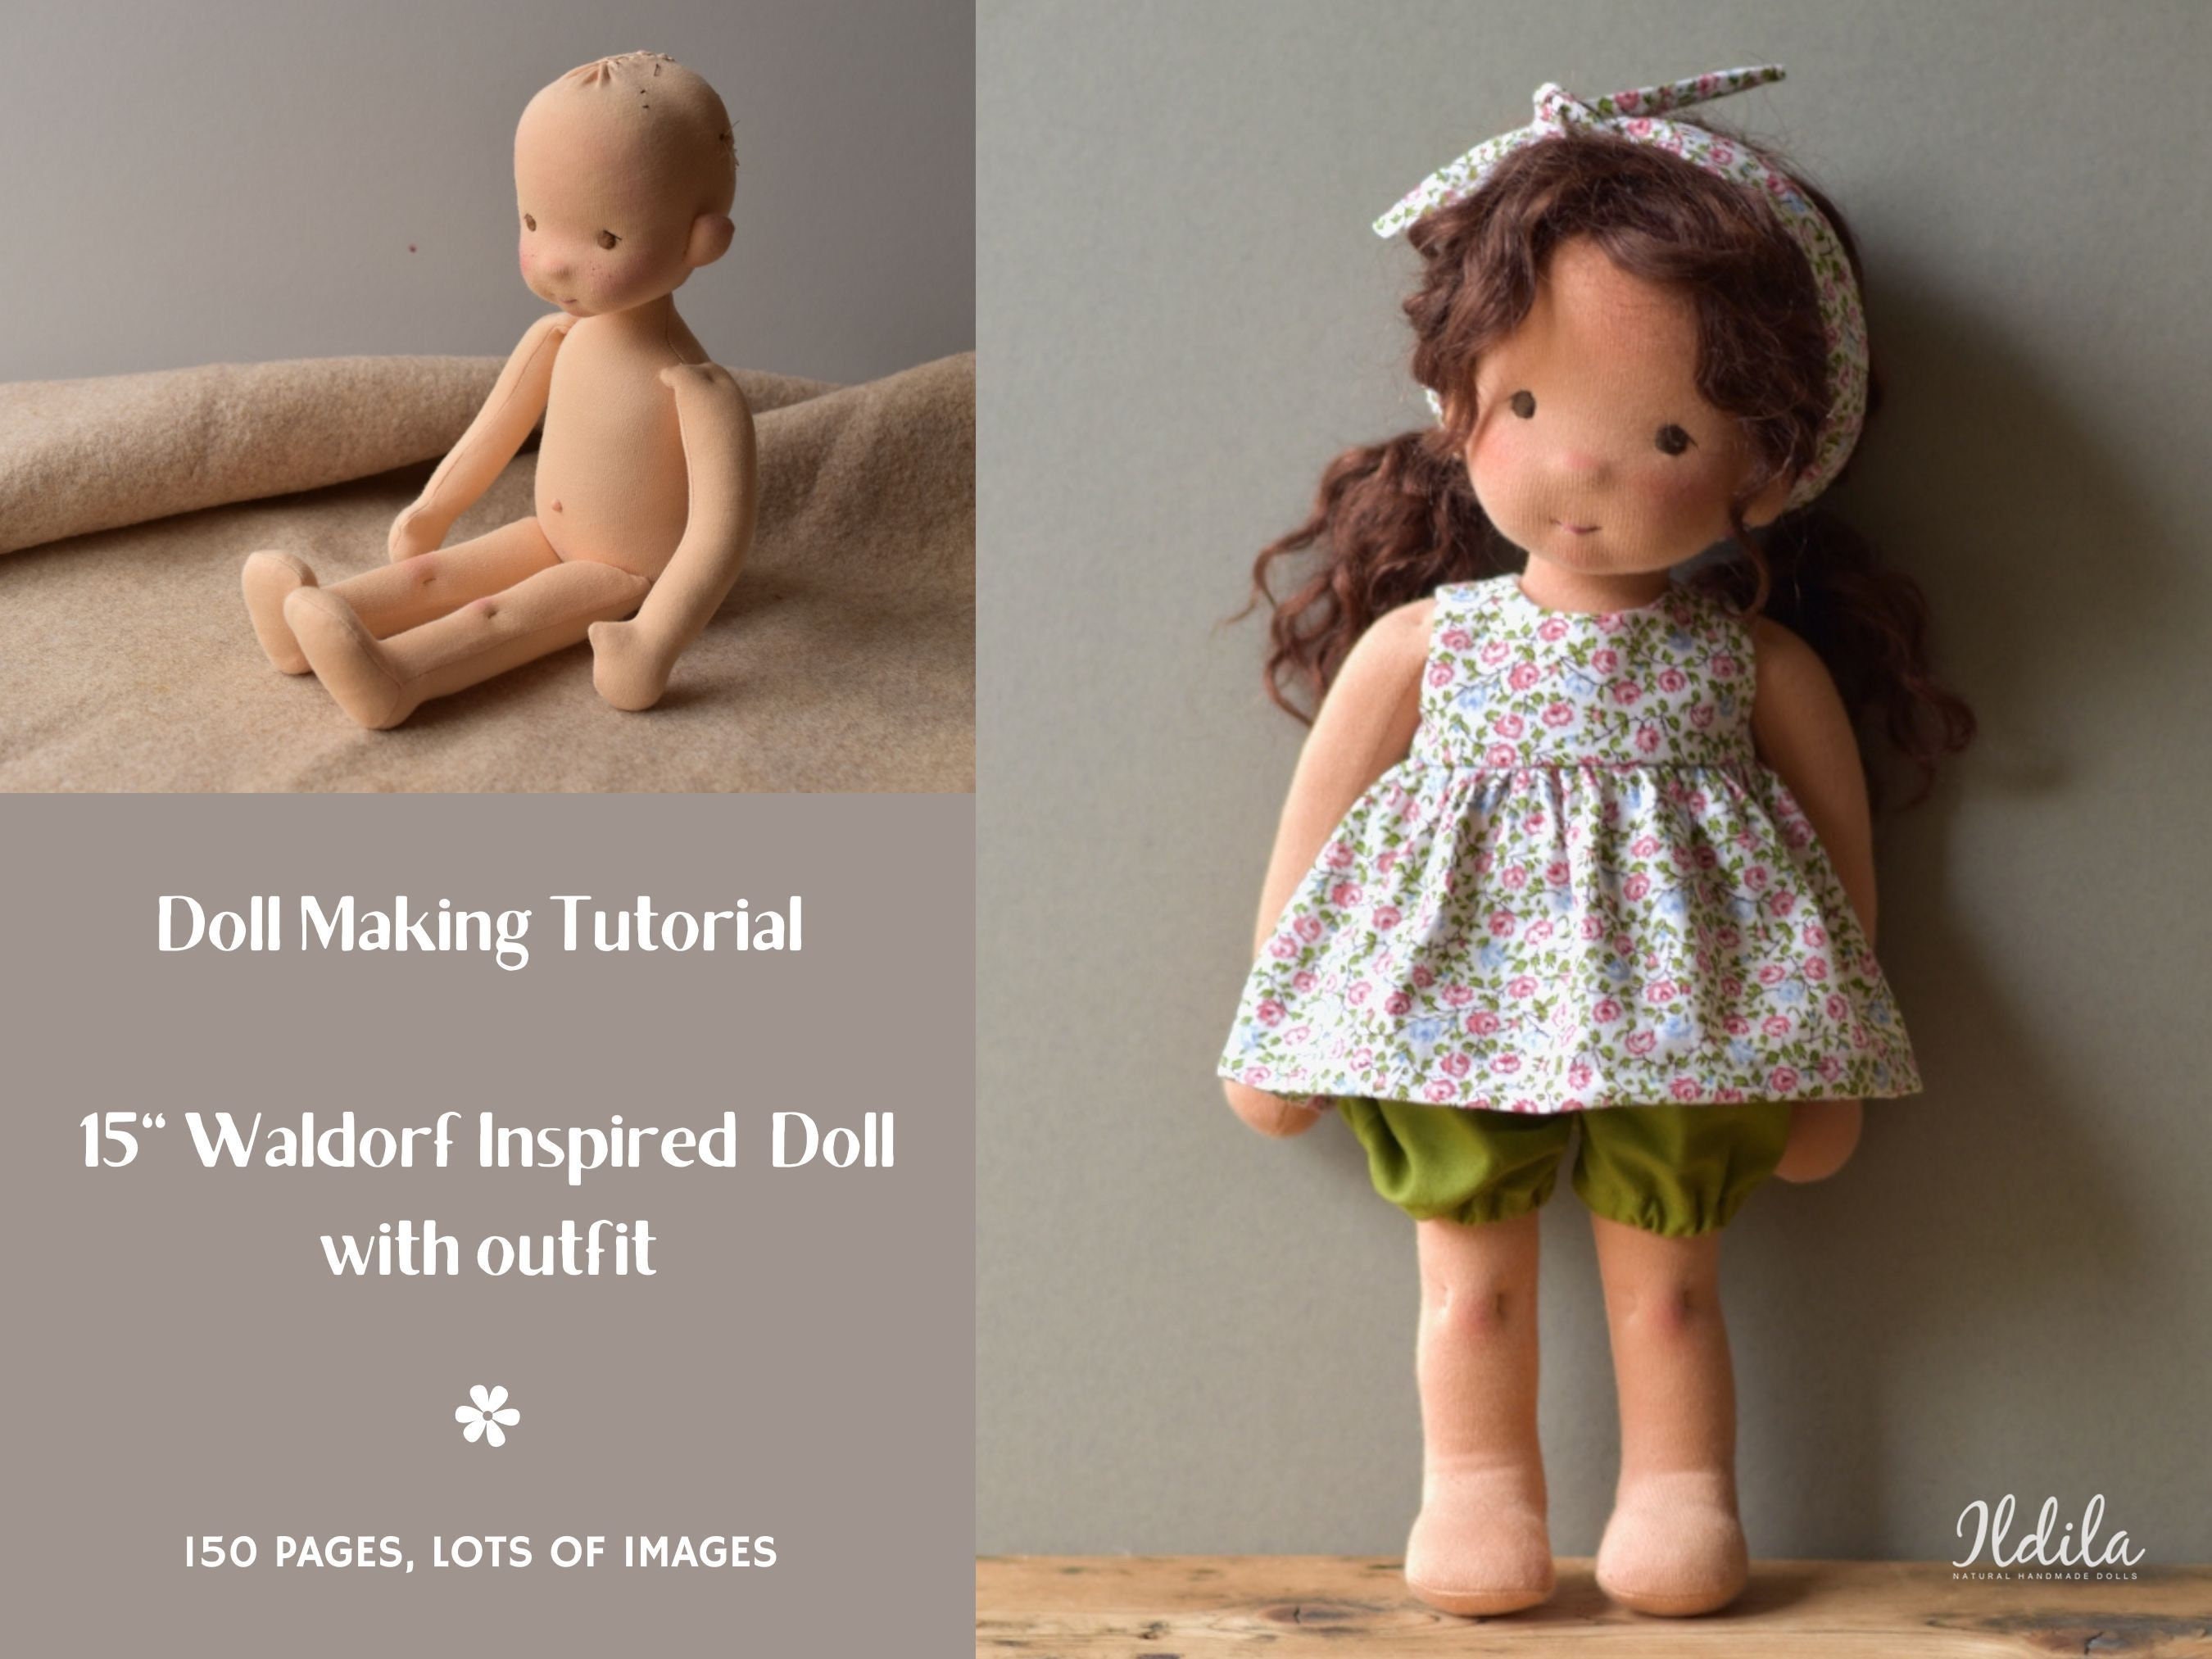 Tutorial and Patterns for 15 Waldorf Inspired Doll With